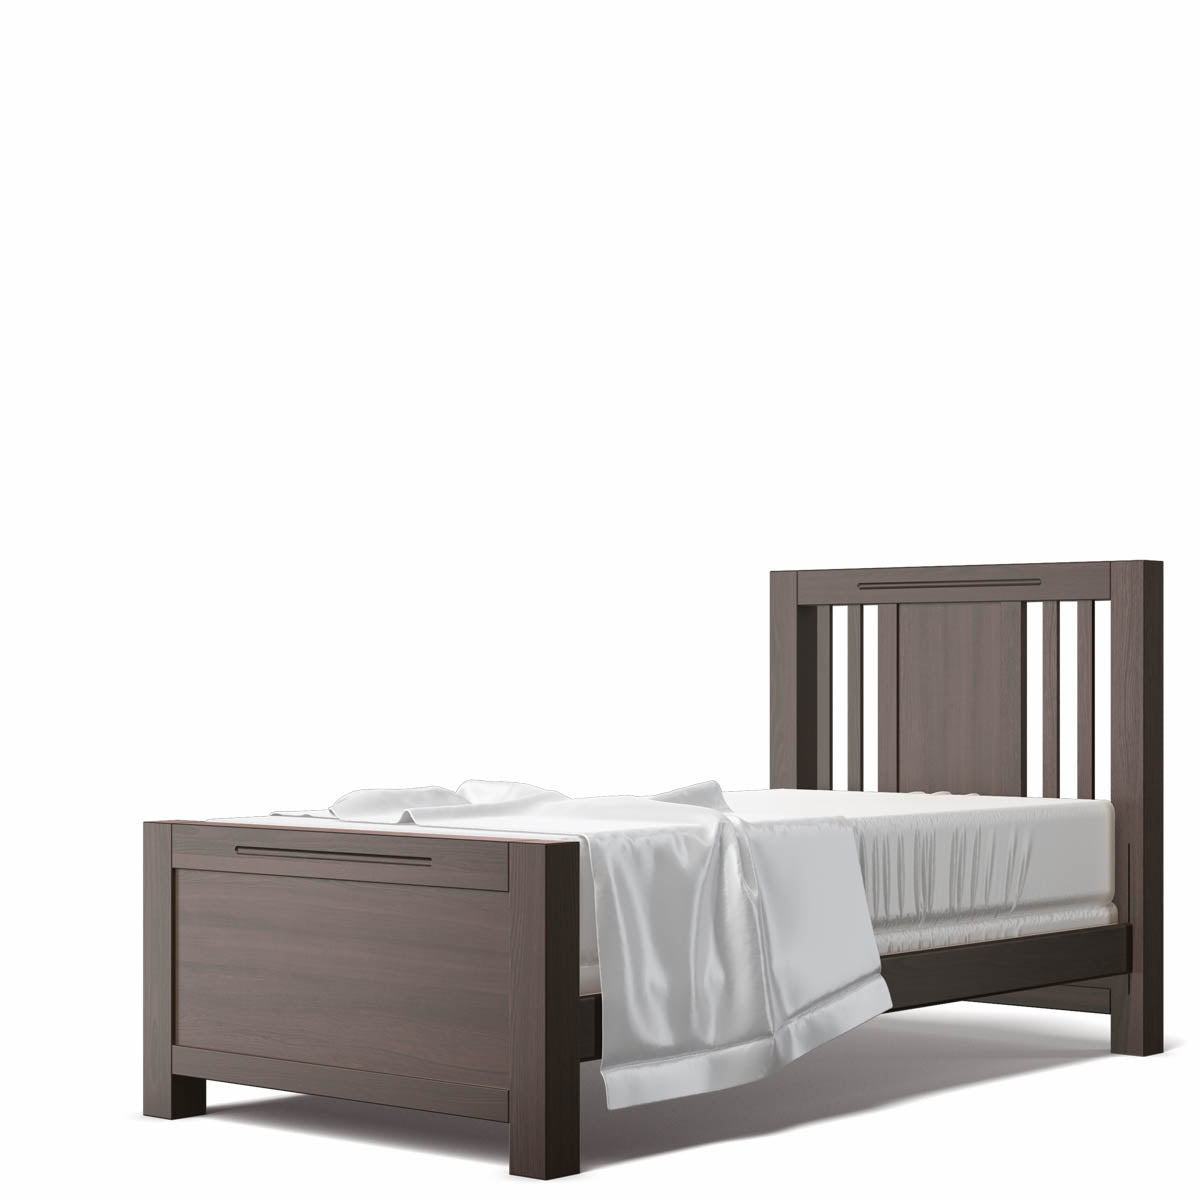 Romina Ventianni Twin Bed